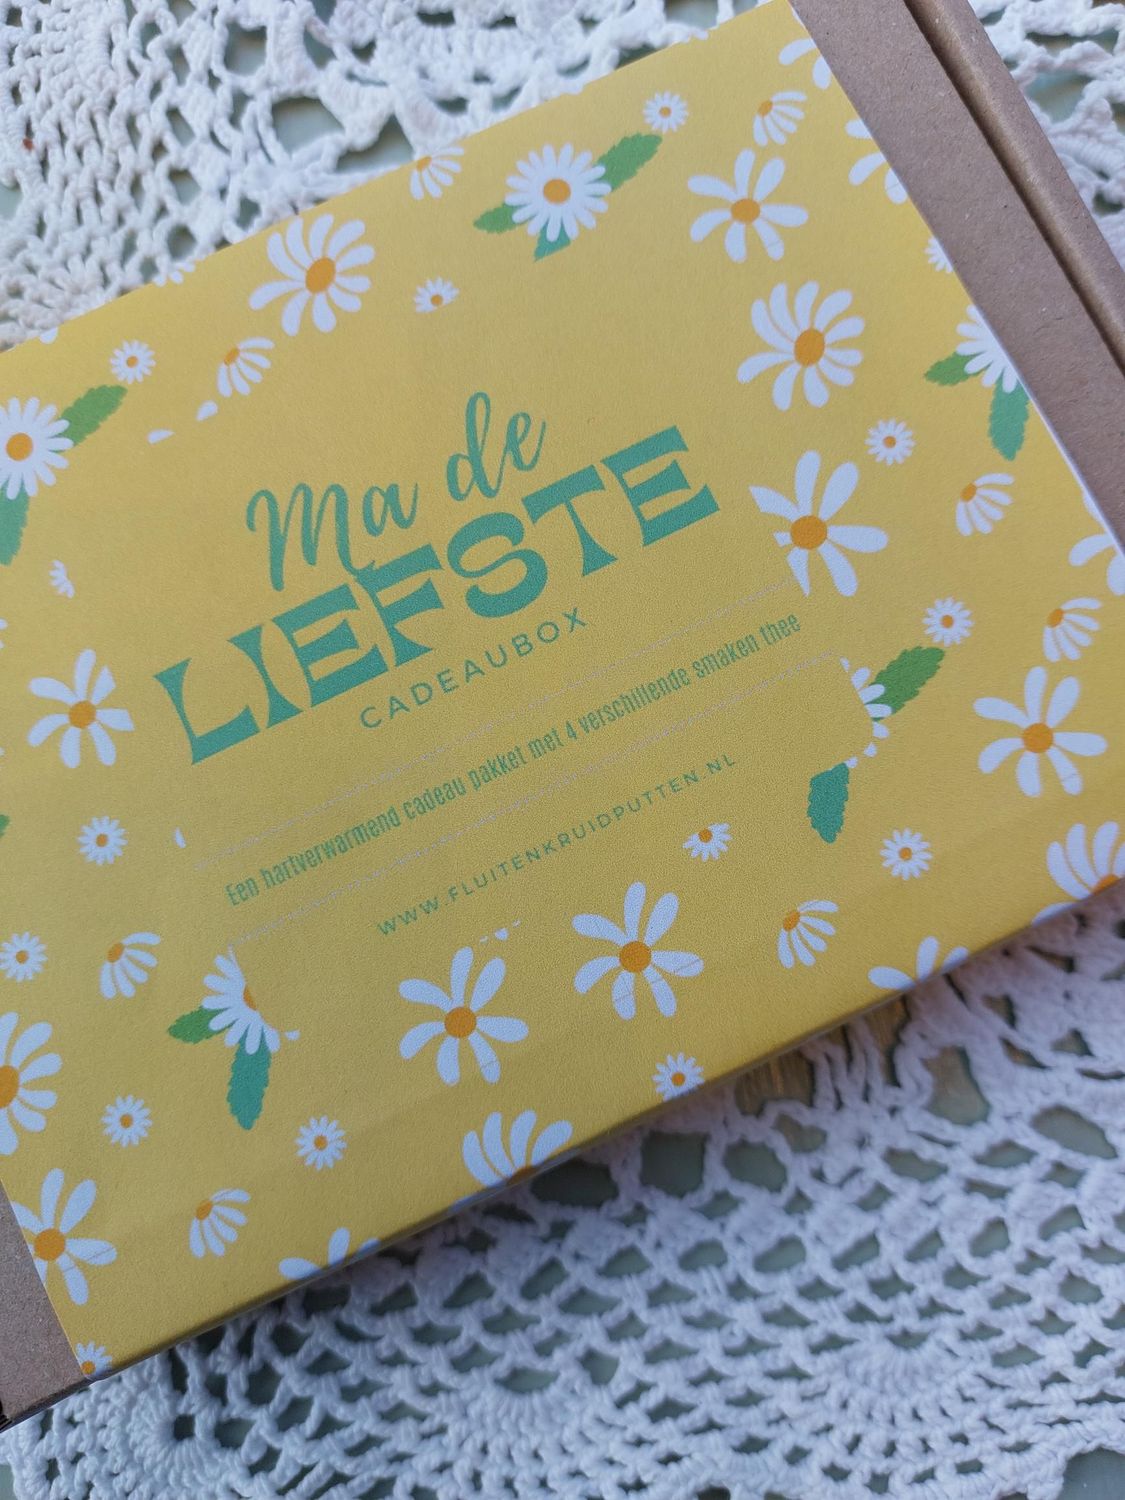 Thee cadeau - Madeliefste